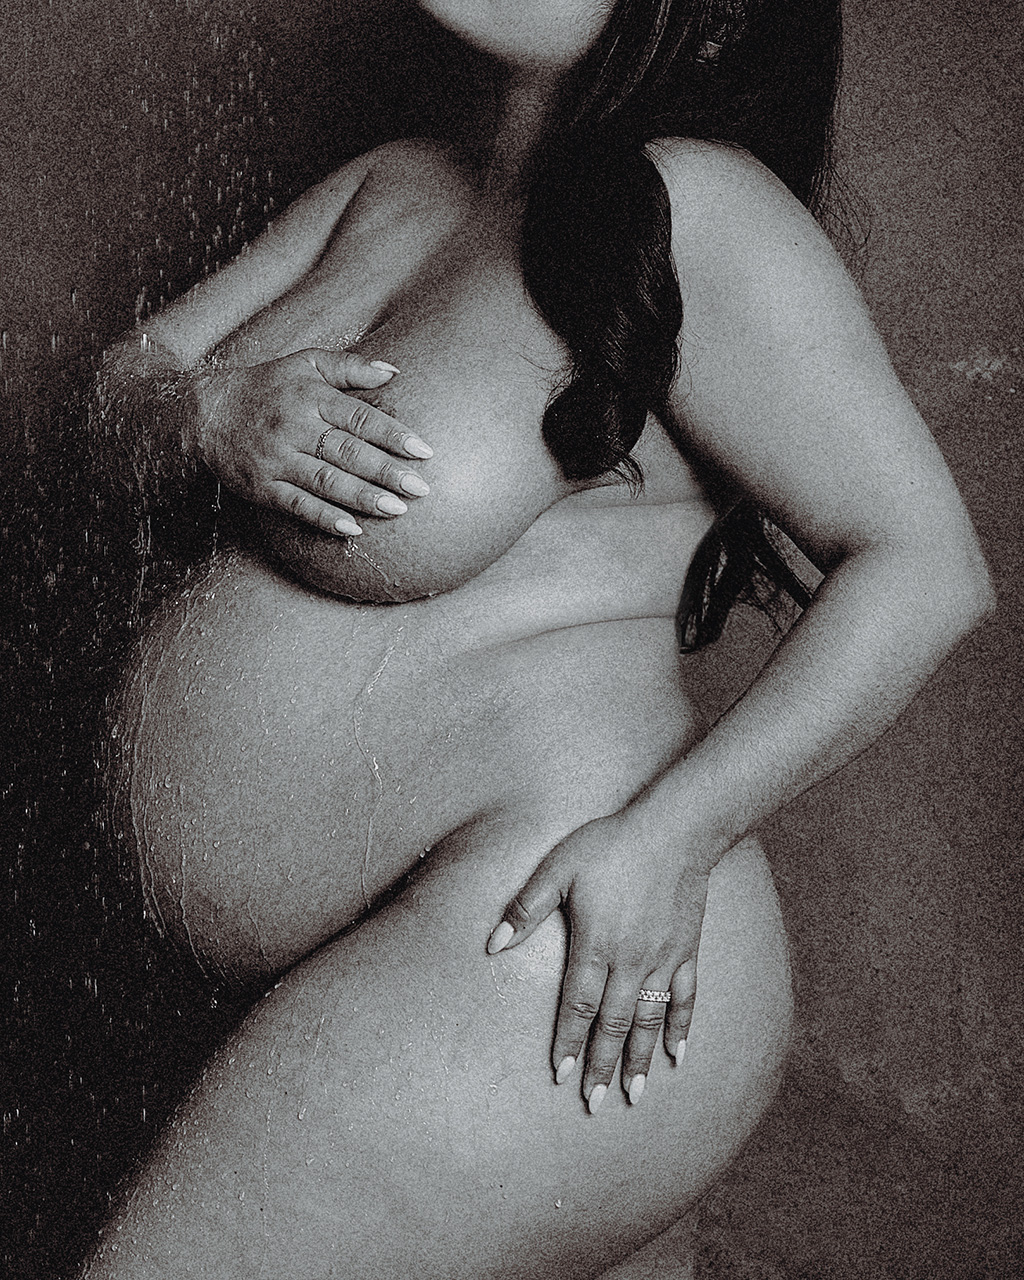 black and white maternity photo of a nude woman under the shower.